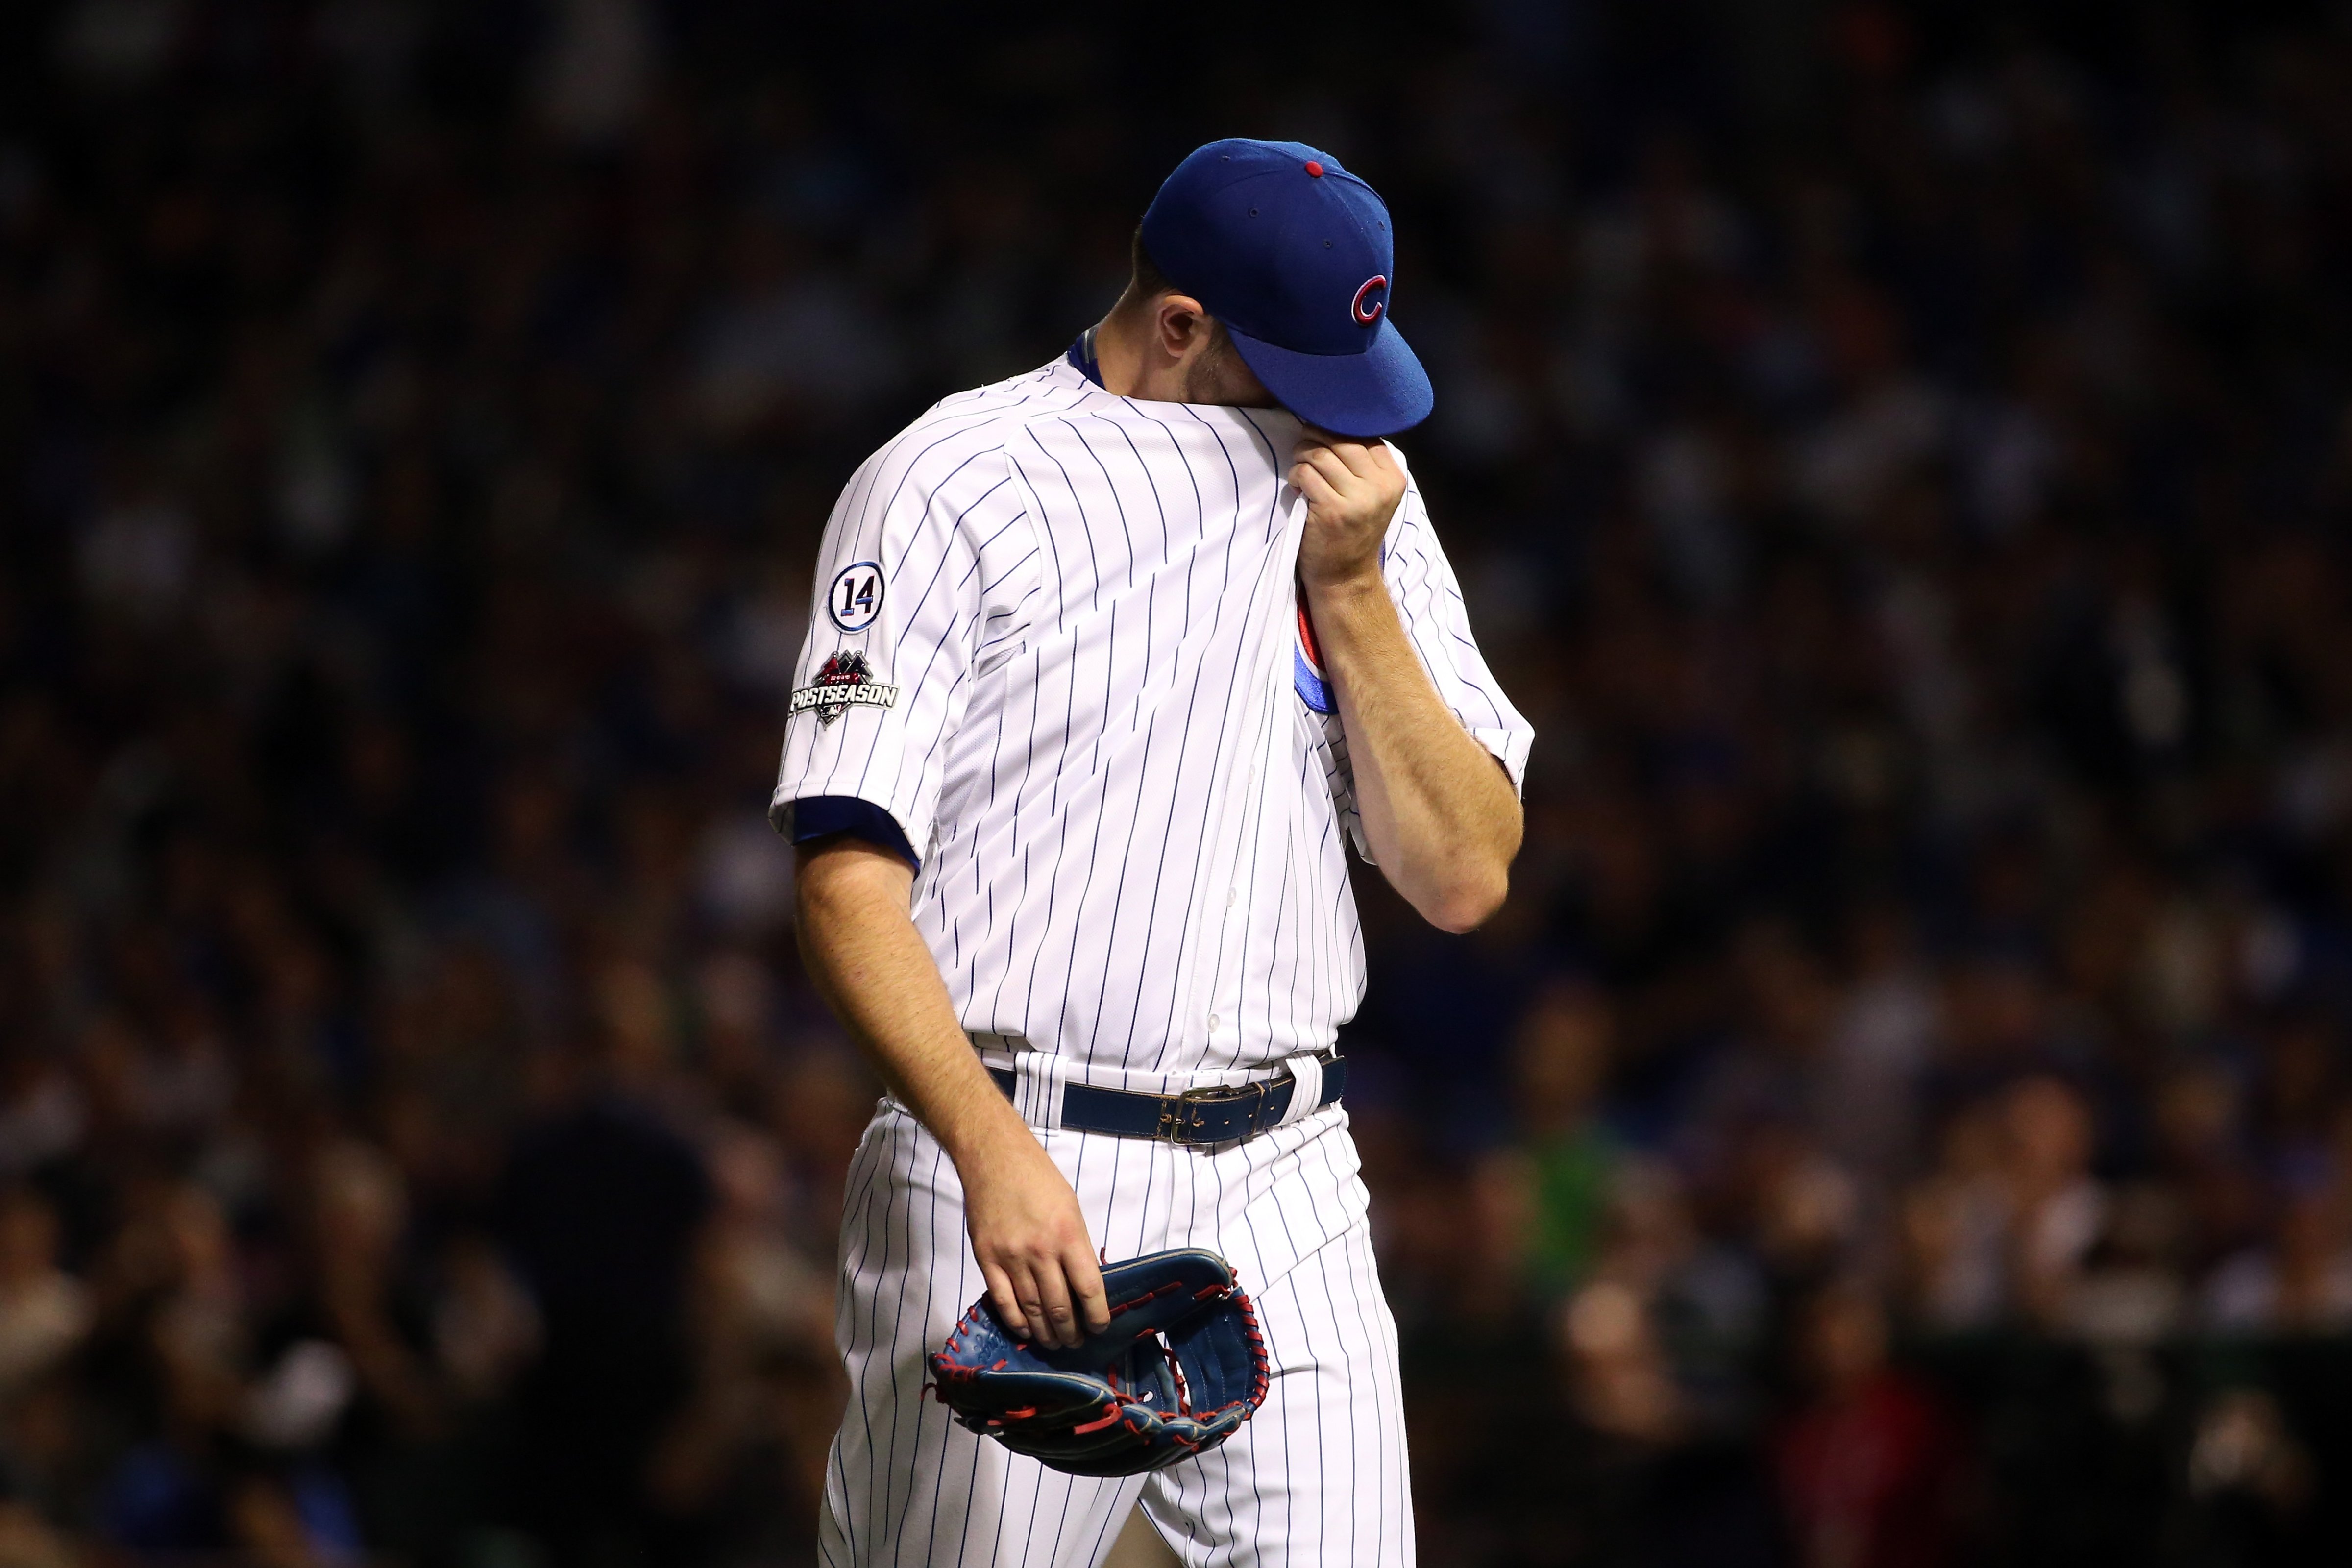 Jason Hammel #39 of the Chicago Cubs walks off the field in the second inning against the New York Mets in the 2015 MLB National League Championship Series at Wrigley Field on Oct.21, 2015 in Chicago, Illinois. (Jonathan Daniel—;Getty Images)